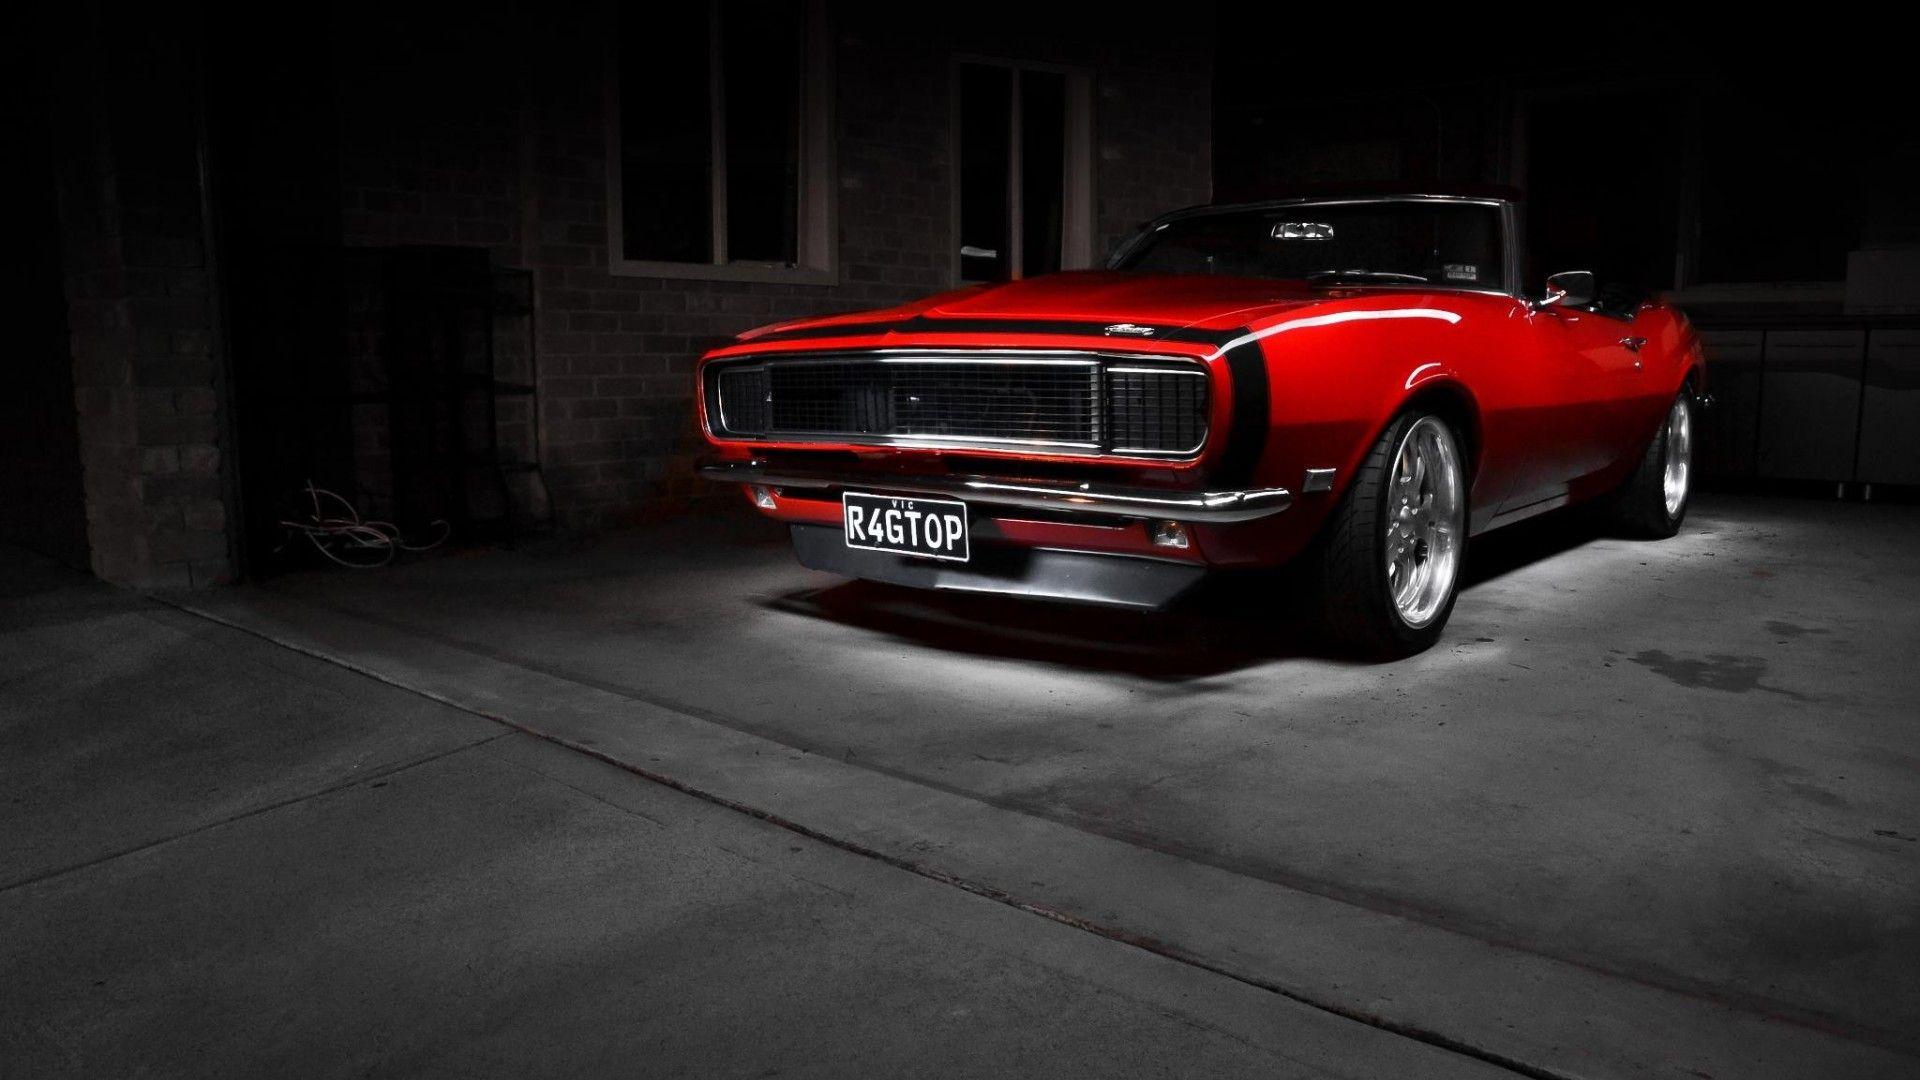 HD Wallpapers Of Muscle Cars - Wallpaper Cave